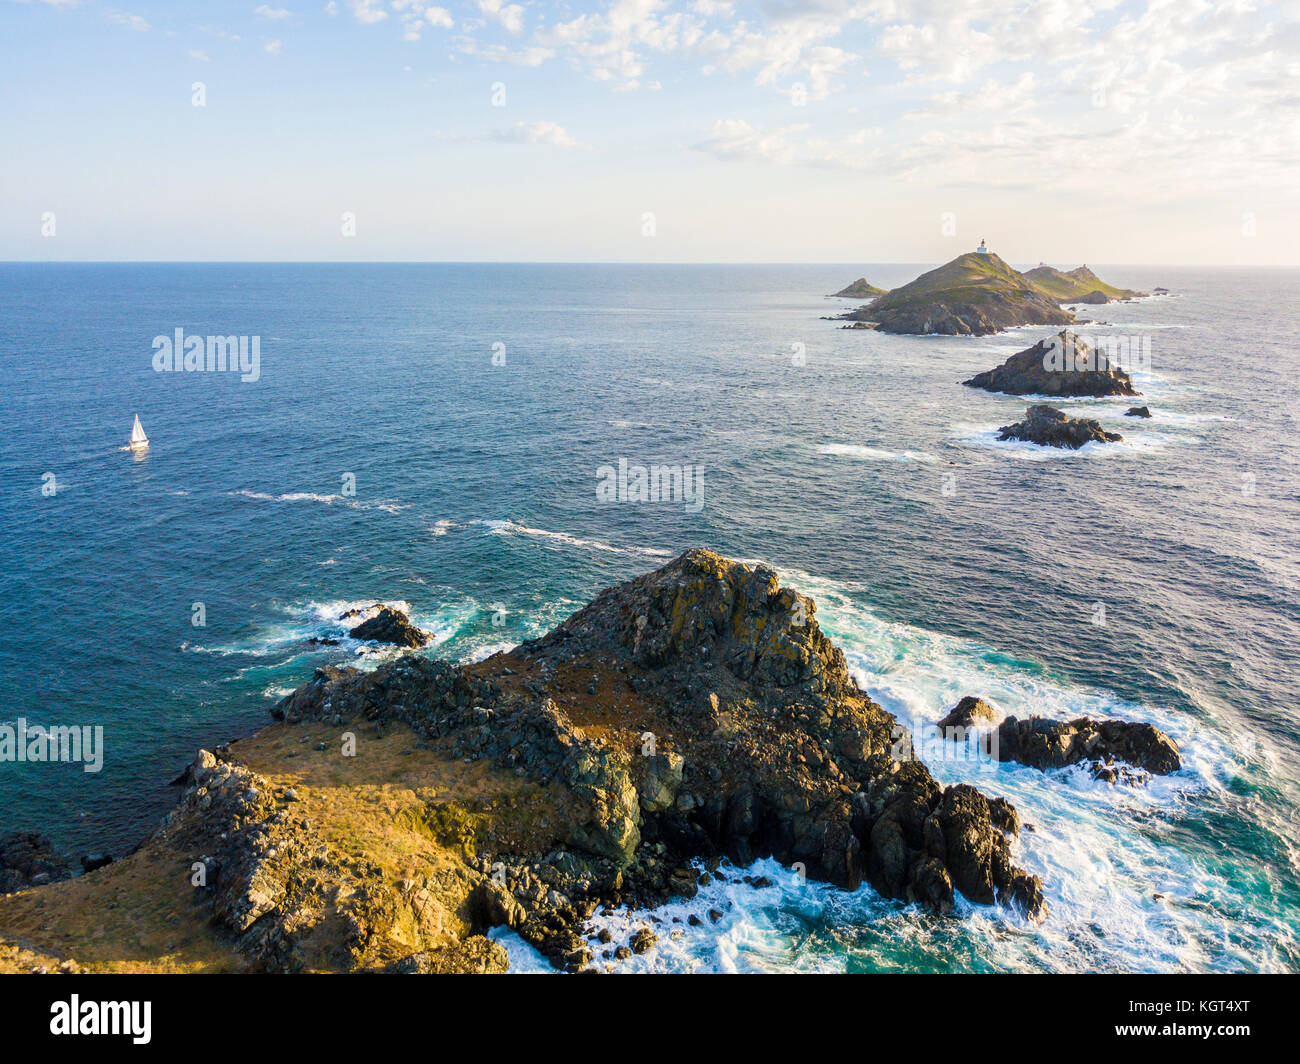 Aerial view of the Bloods Islands and Lighthouse, Corsica, France: Rocks, waves and sailboat. Four islands of dark red porphyry, small archipelago Stock Photo